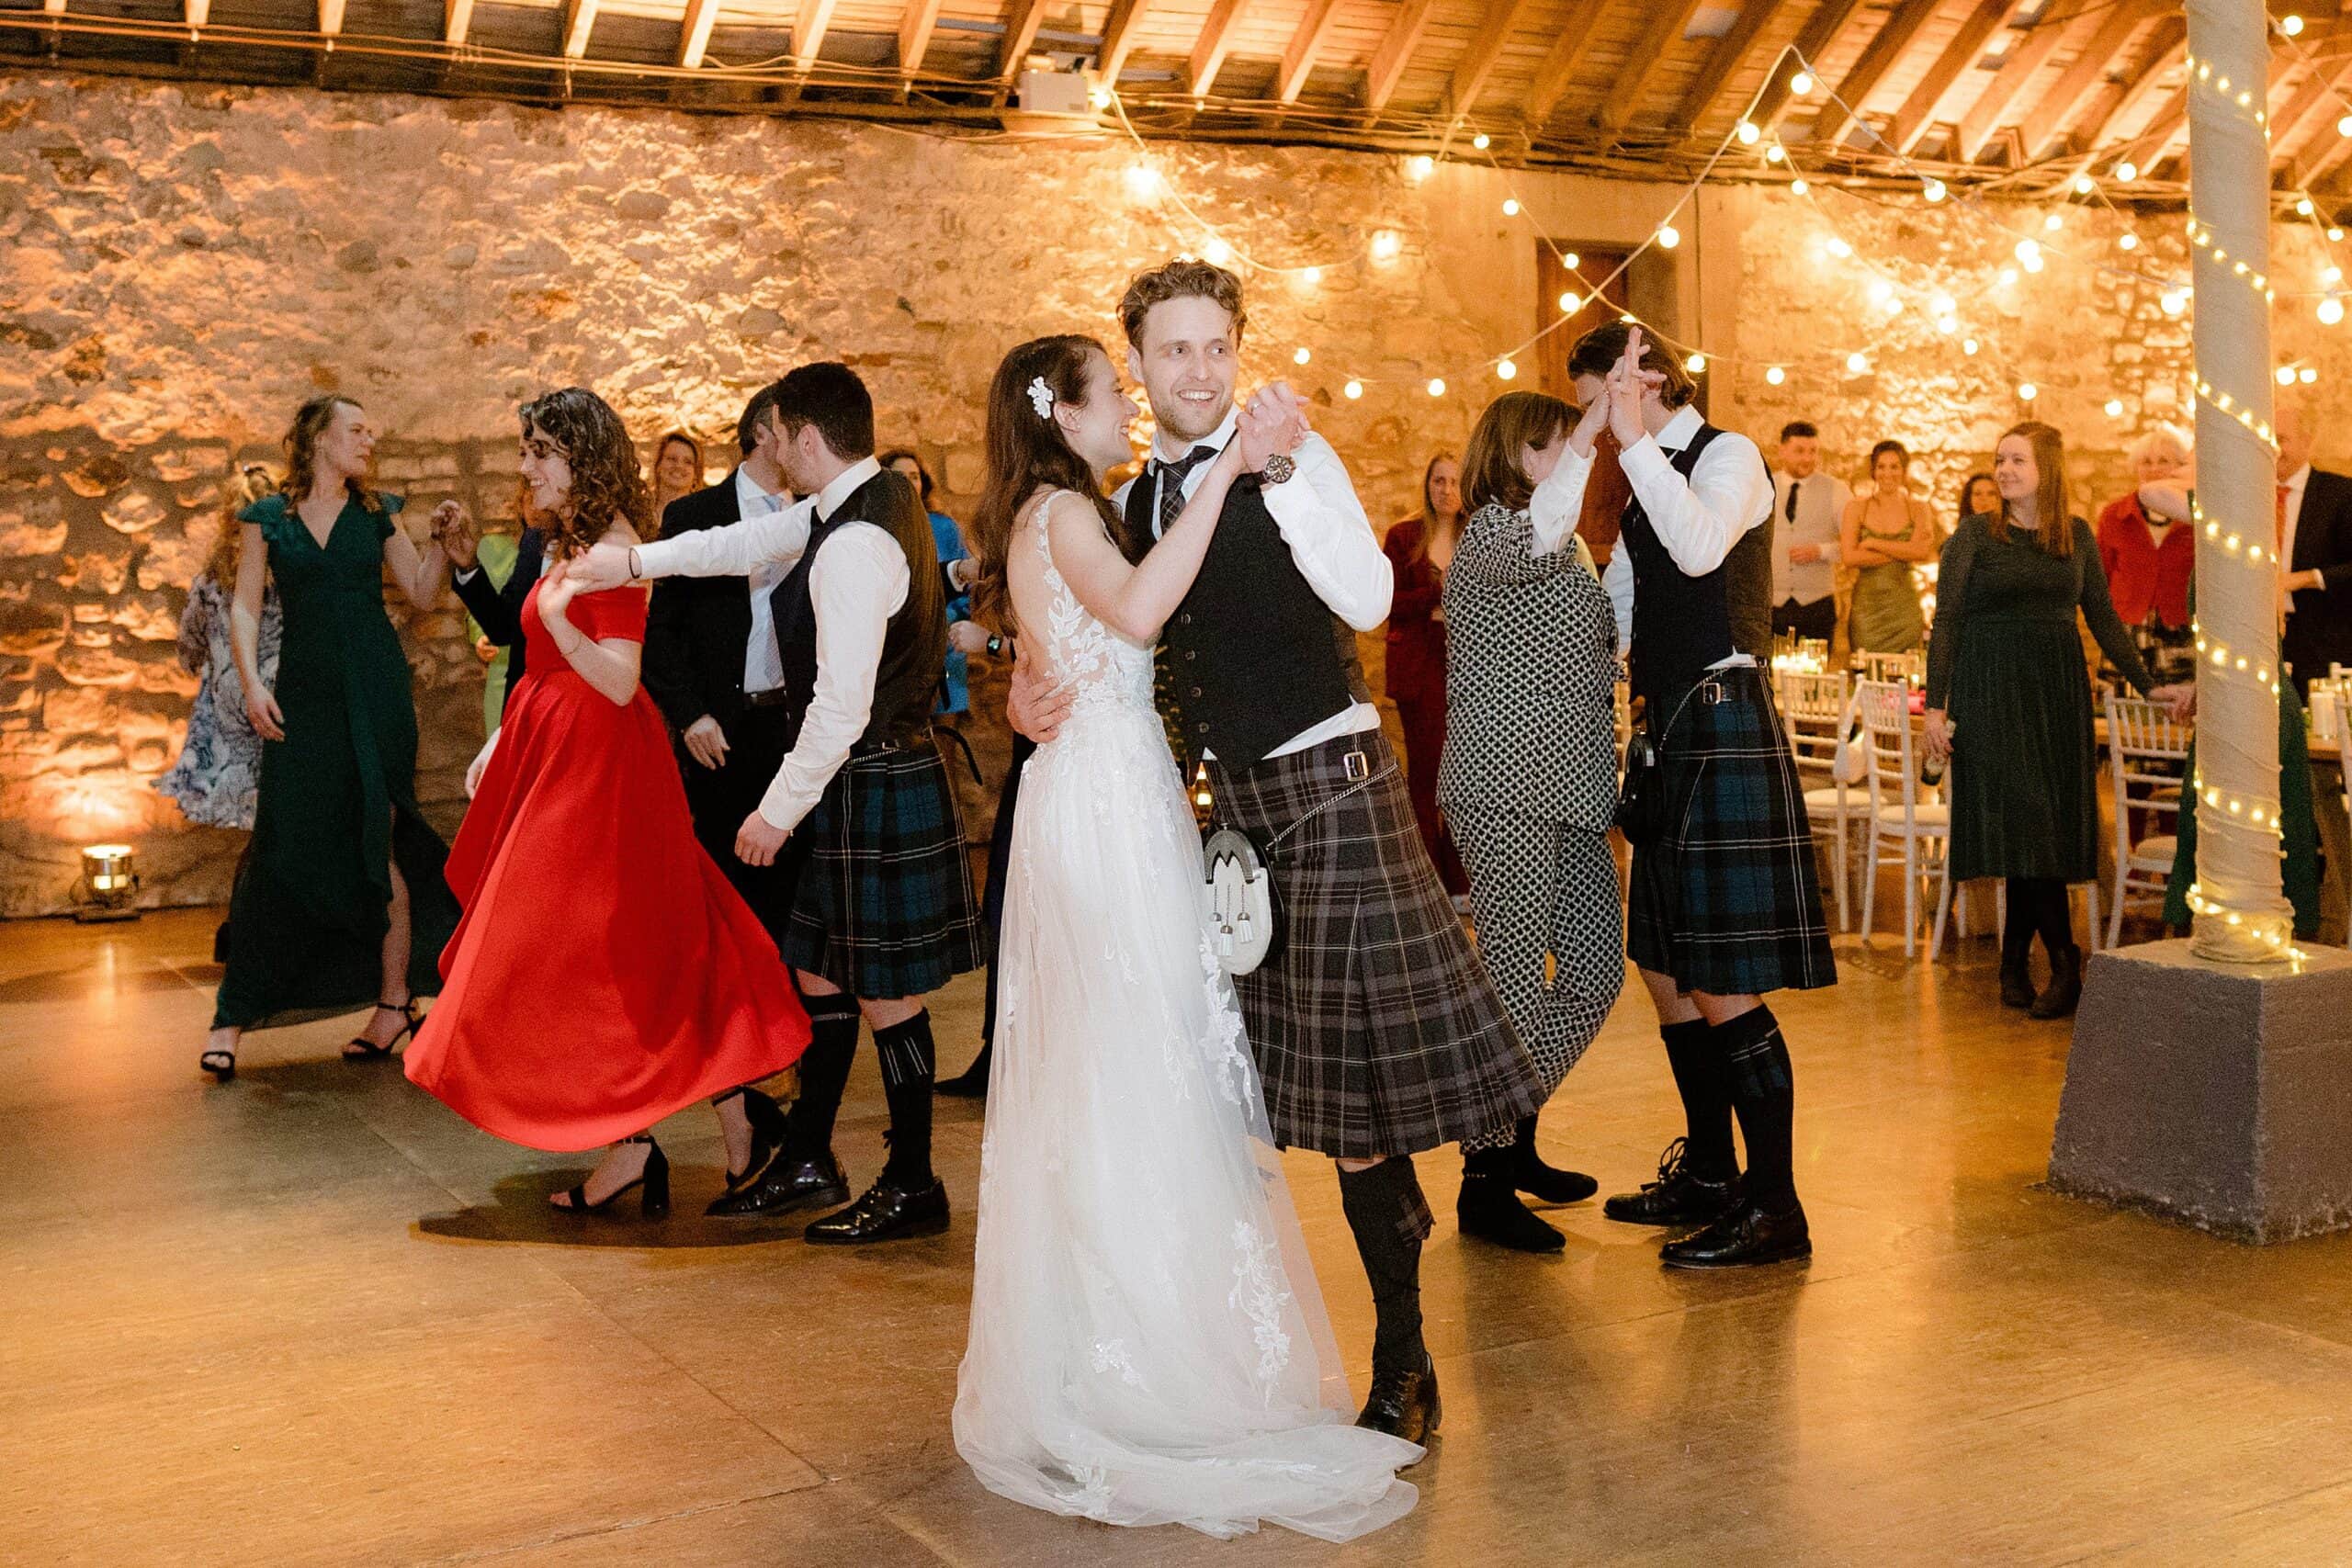 interior inside view of a barn wedding venue in scotland showing the bride groom and guests dancing underneath wooden beams and festoon lights captured by st andrews wedding photographer